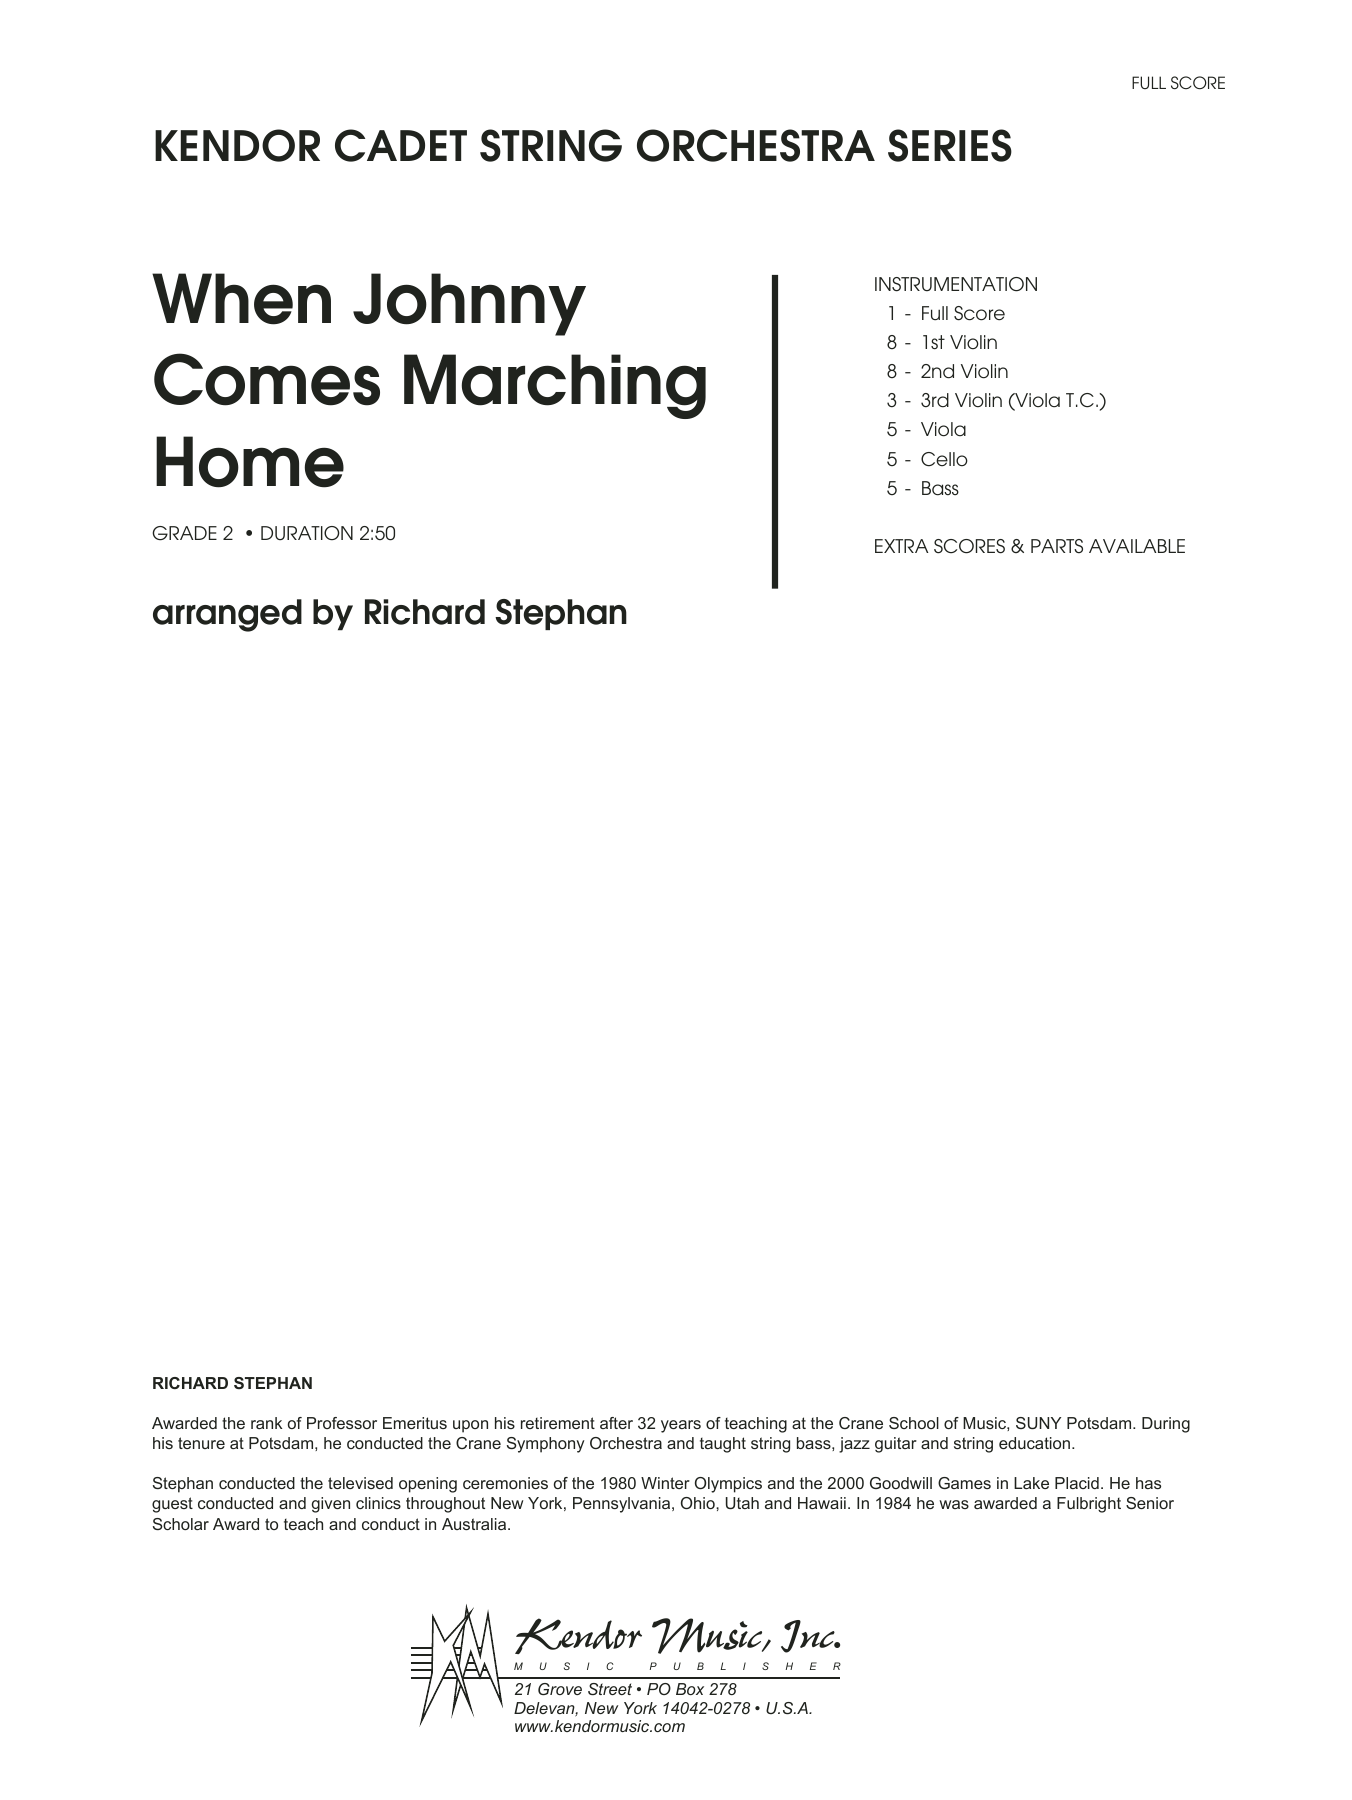 Download Richard Stephan When Johnny Comes Marching Home - Full Sheet Music